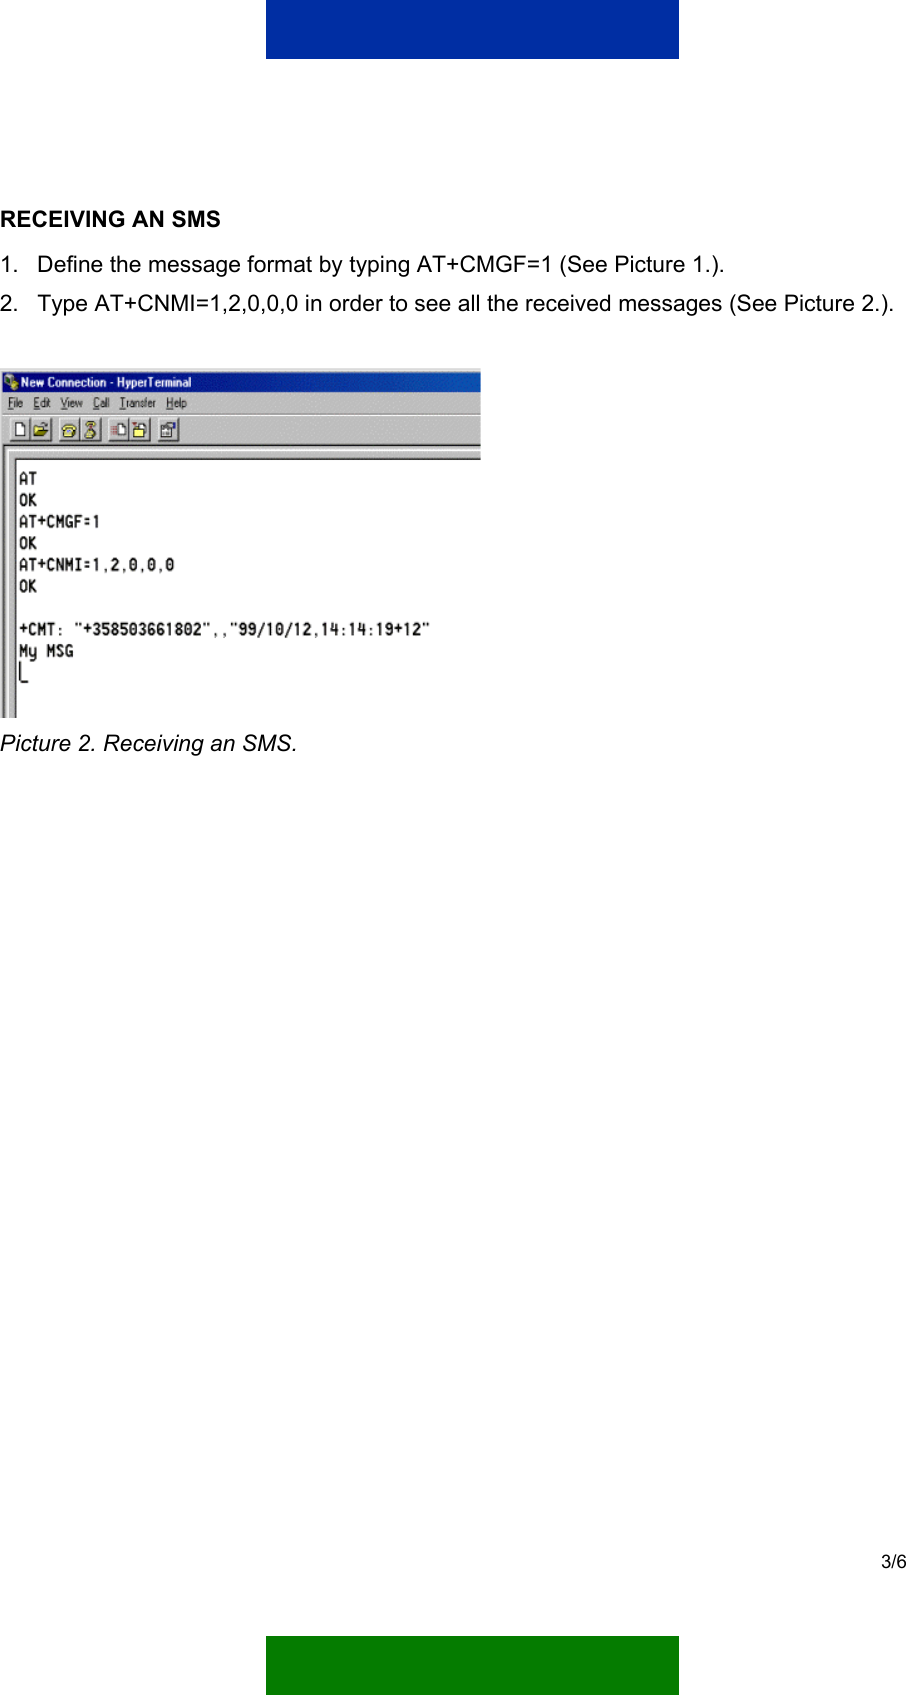 Page 5 of 8 - Alvarez NA Support Guide For The Nokia Phones And AT Commands  To Manual 0a6b6aae-c9a5-481b-abcc-b4781d91f446